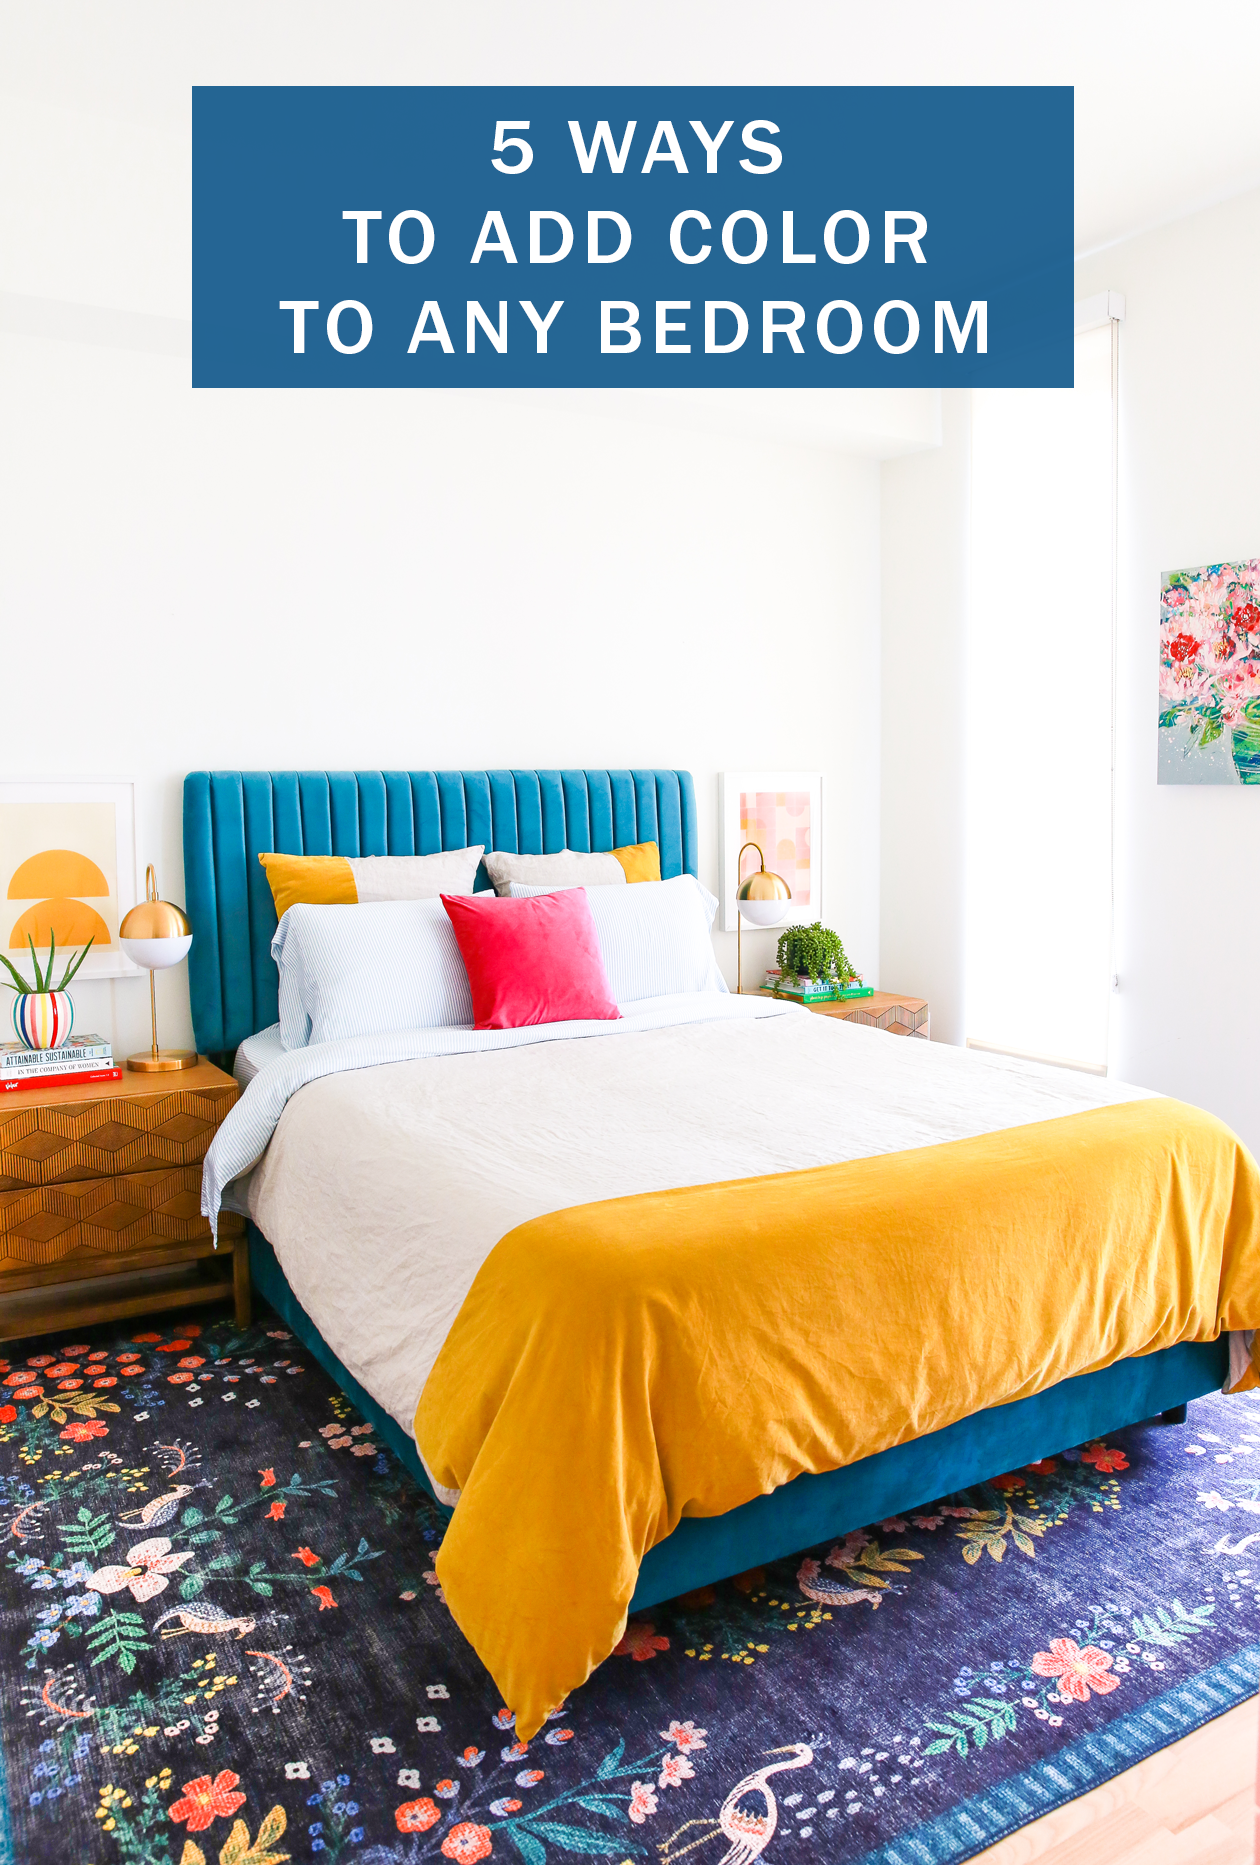 5 Ways to Add Color to Any Bedroom